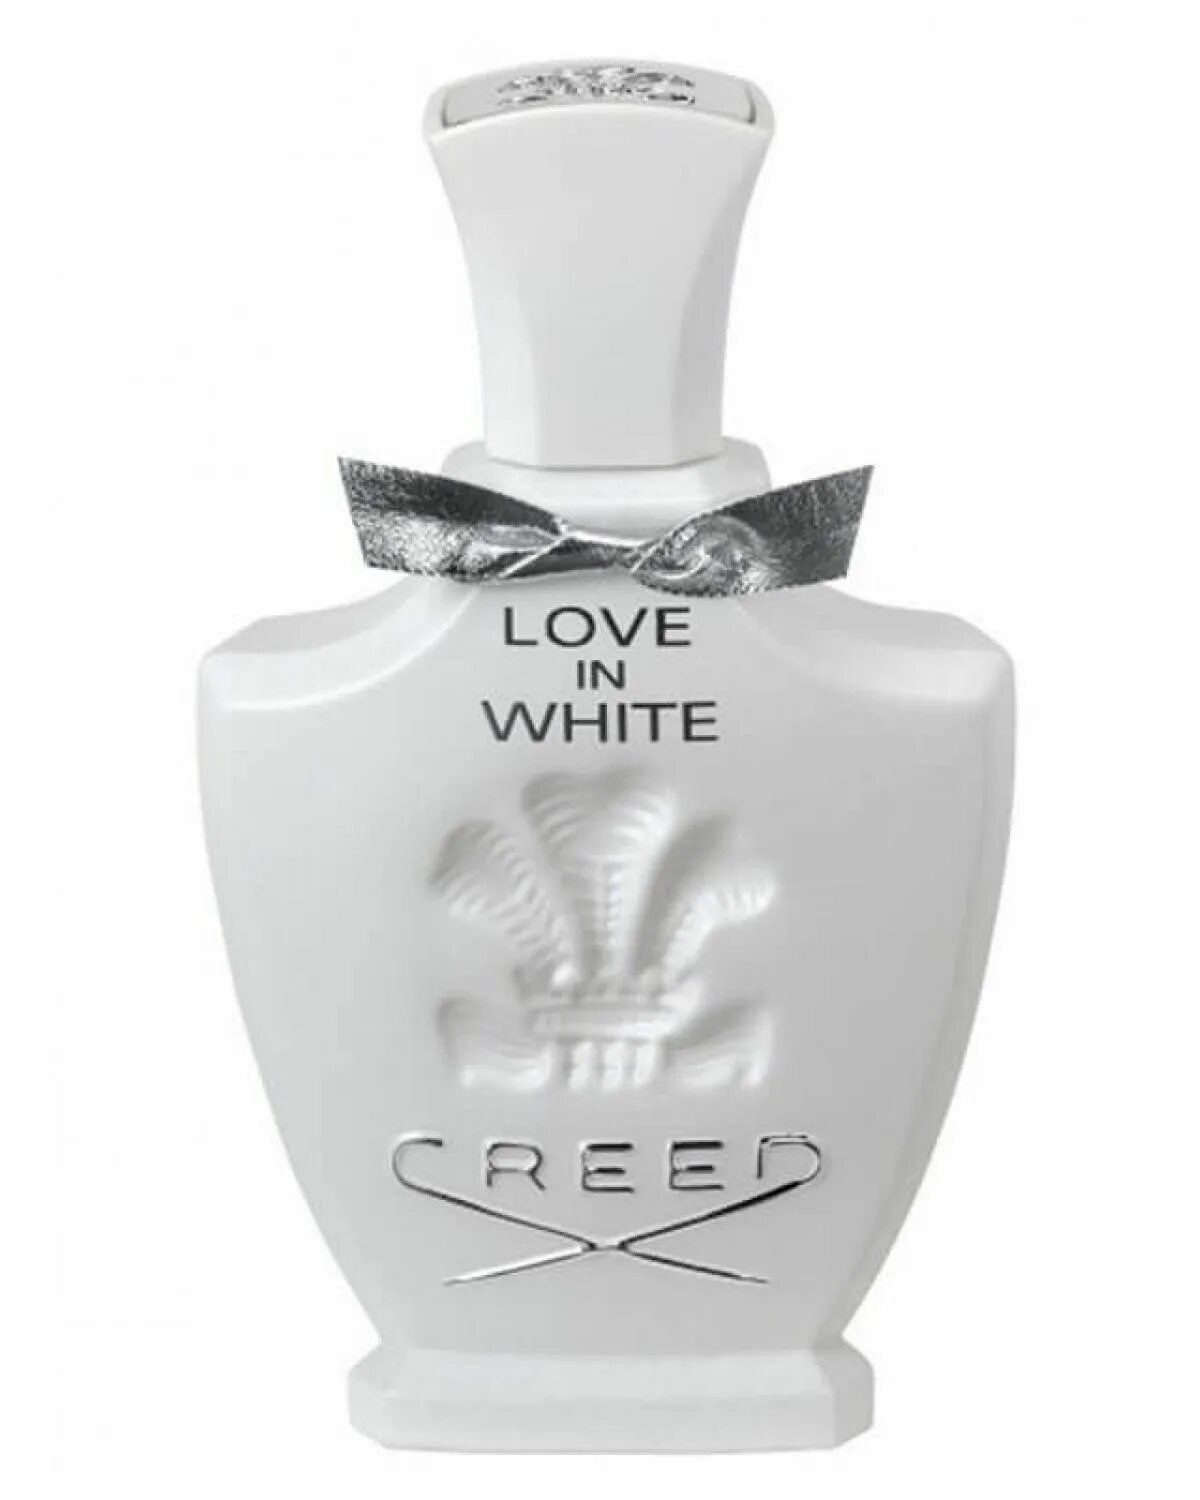 Creed духи женские Love in White. Creed Love in White, 75 ml. Creed Love in White (жен) EDP 75 мл. Туалетная вода Creed Love in White 75 ml. Вайт лове